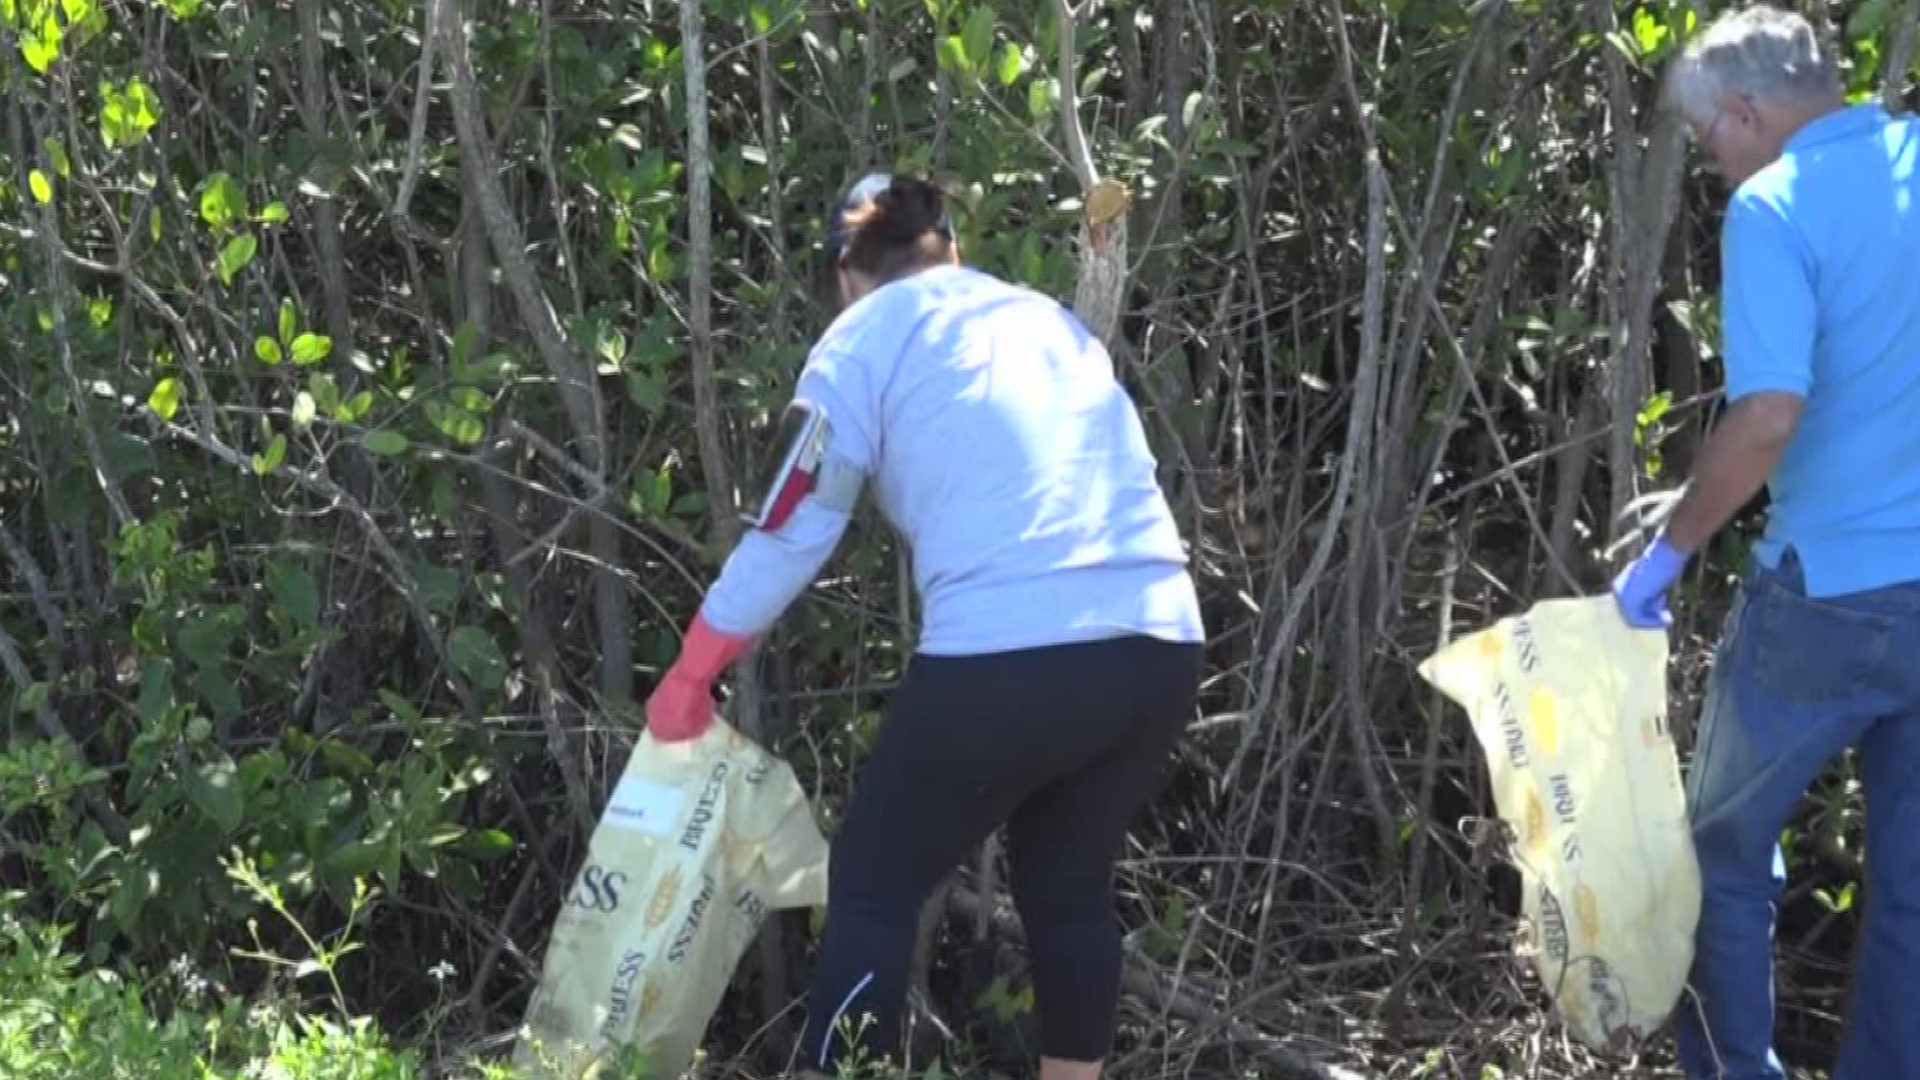 Treasure Island residents helped the Earth by clearing up the shoreline.